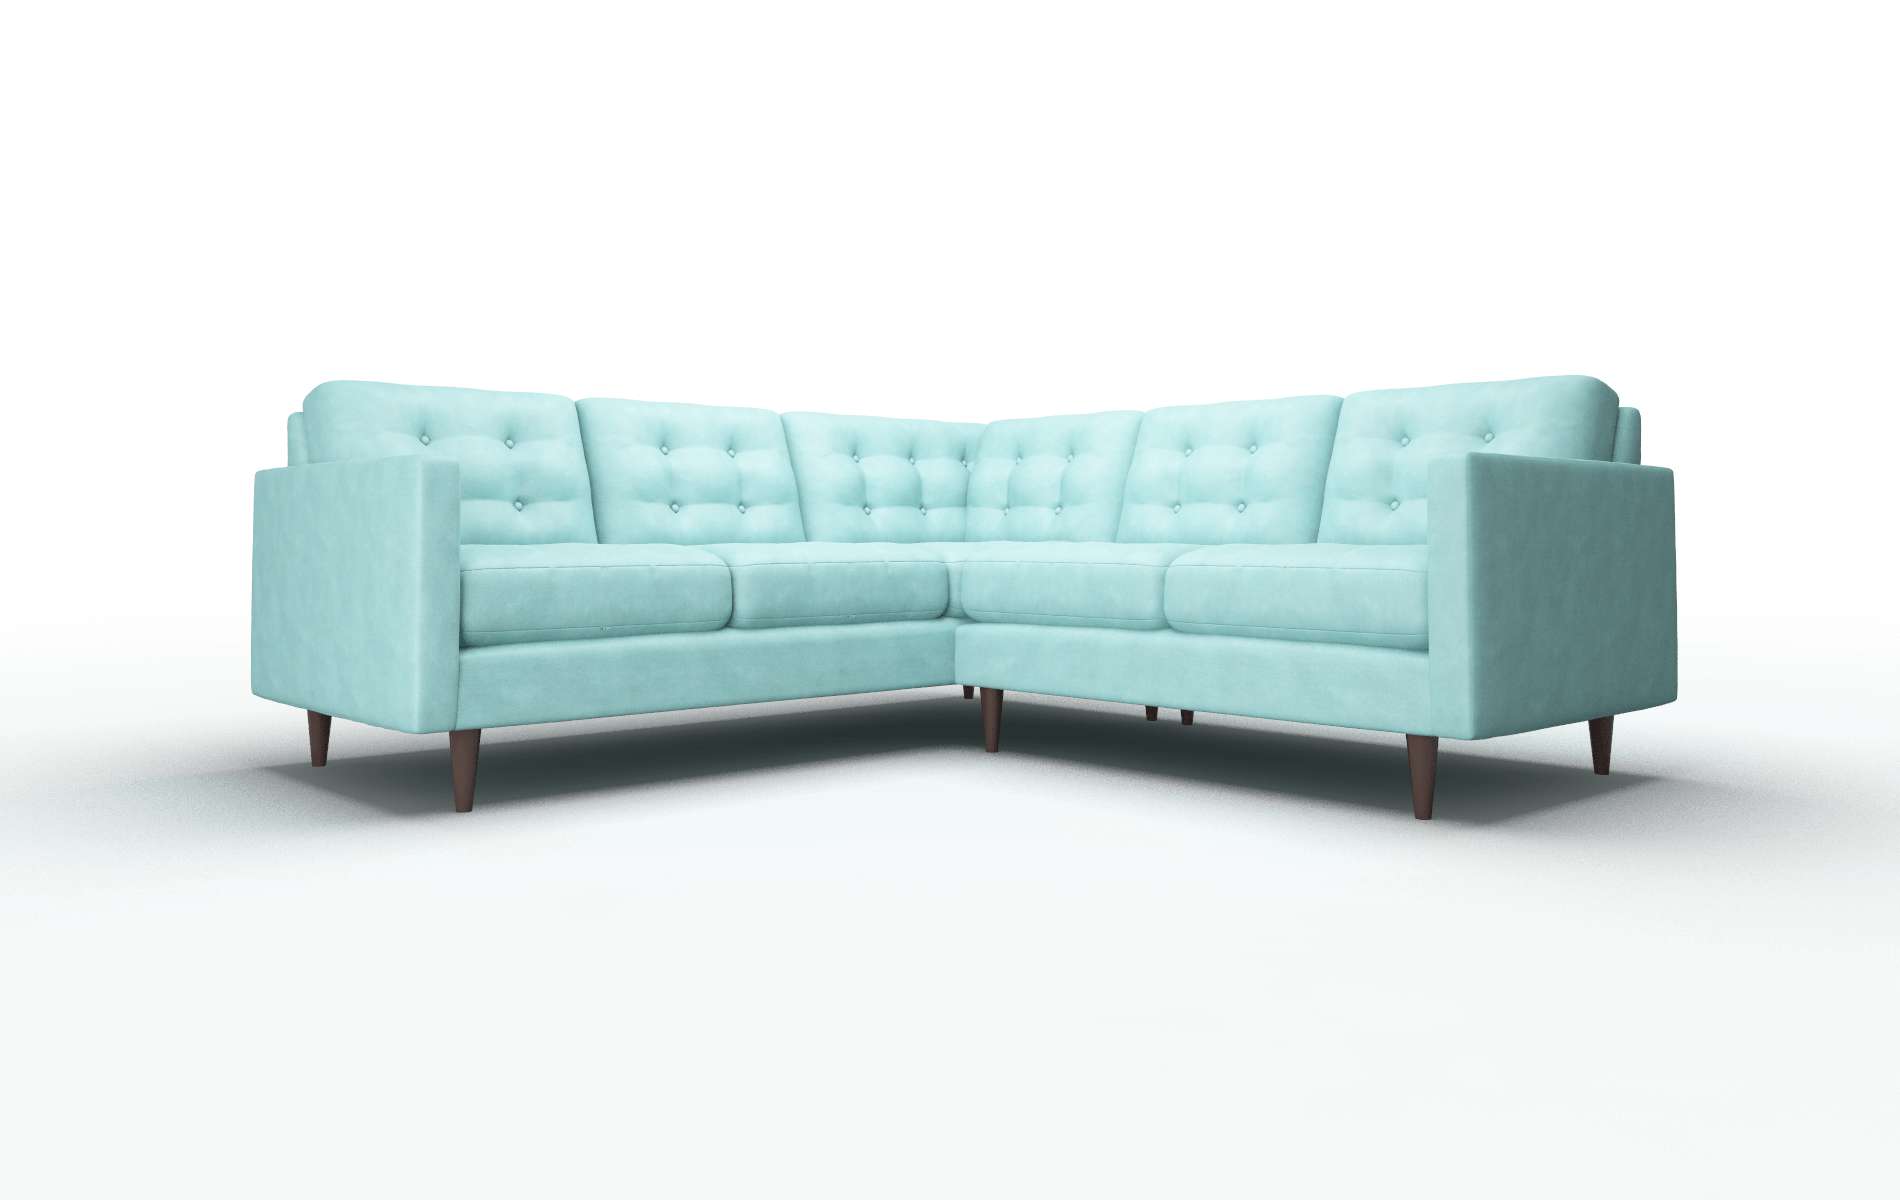 Oslo Curious Turquoise chair espresso legs